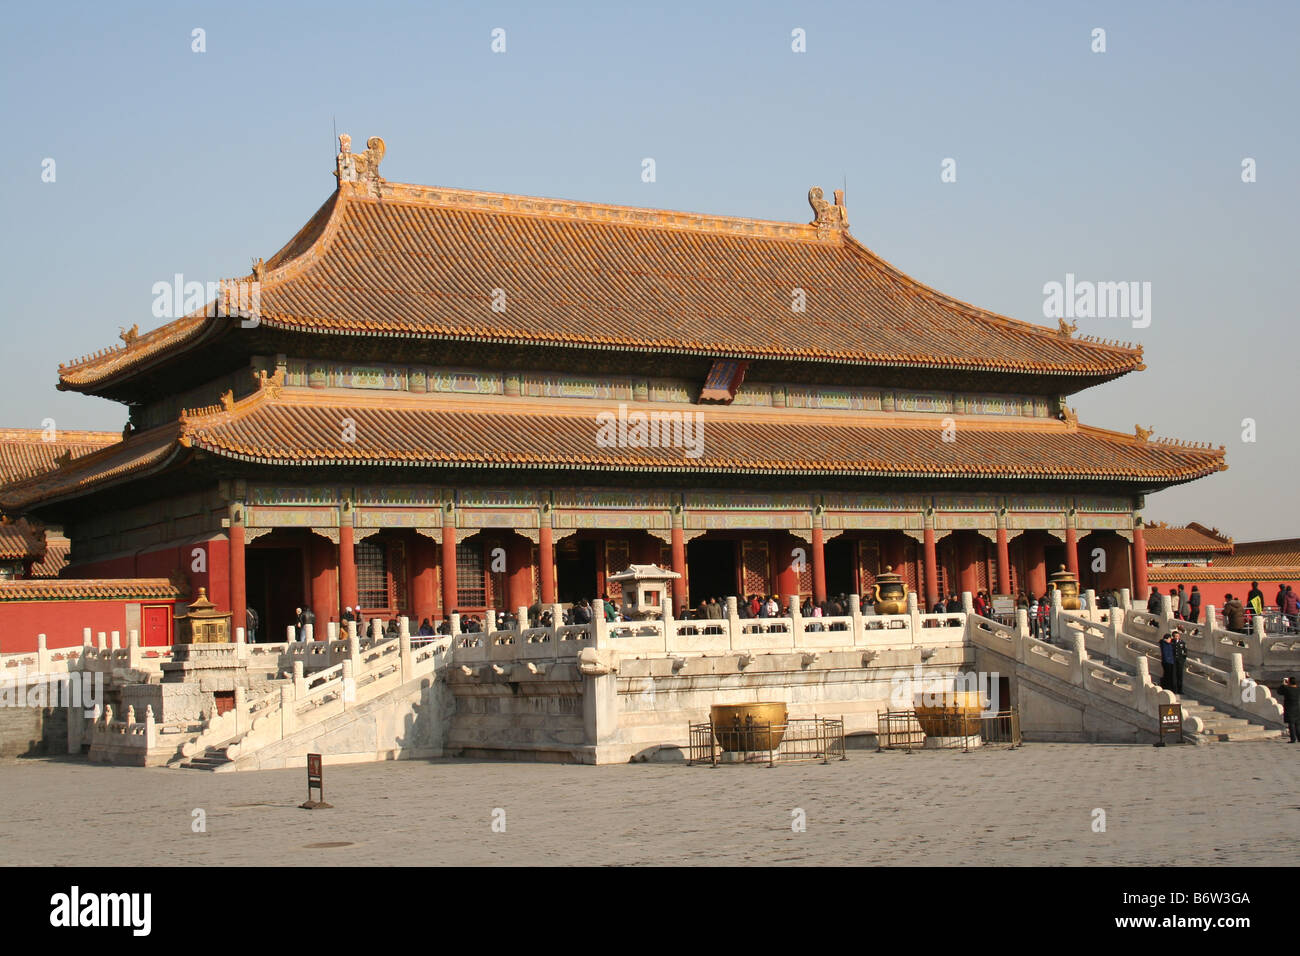 Inside the Walls of the Forbidden City in Beijing in China Stock Photo